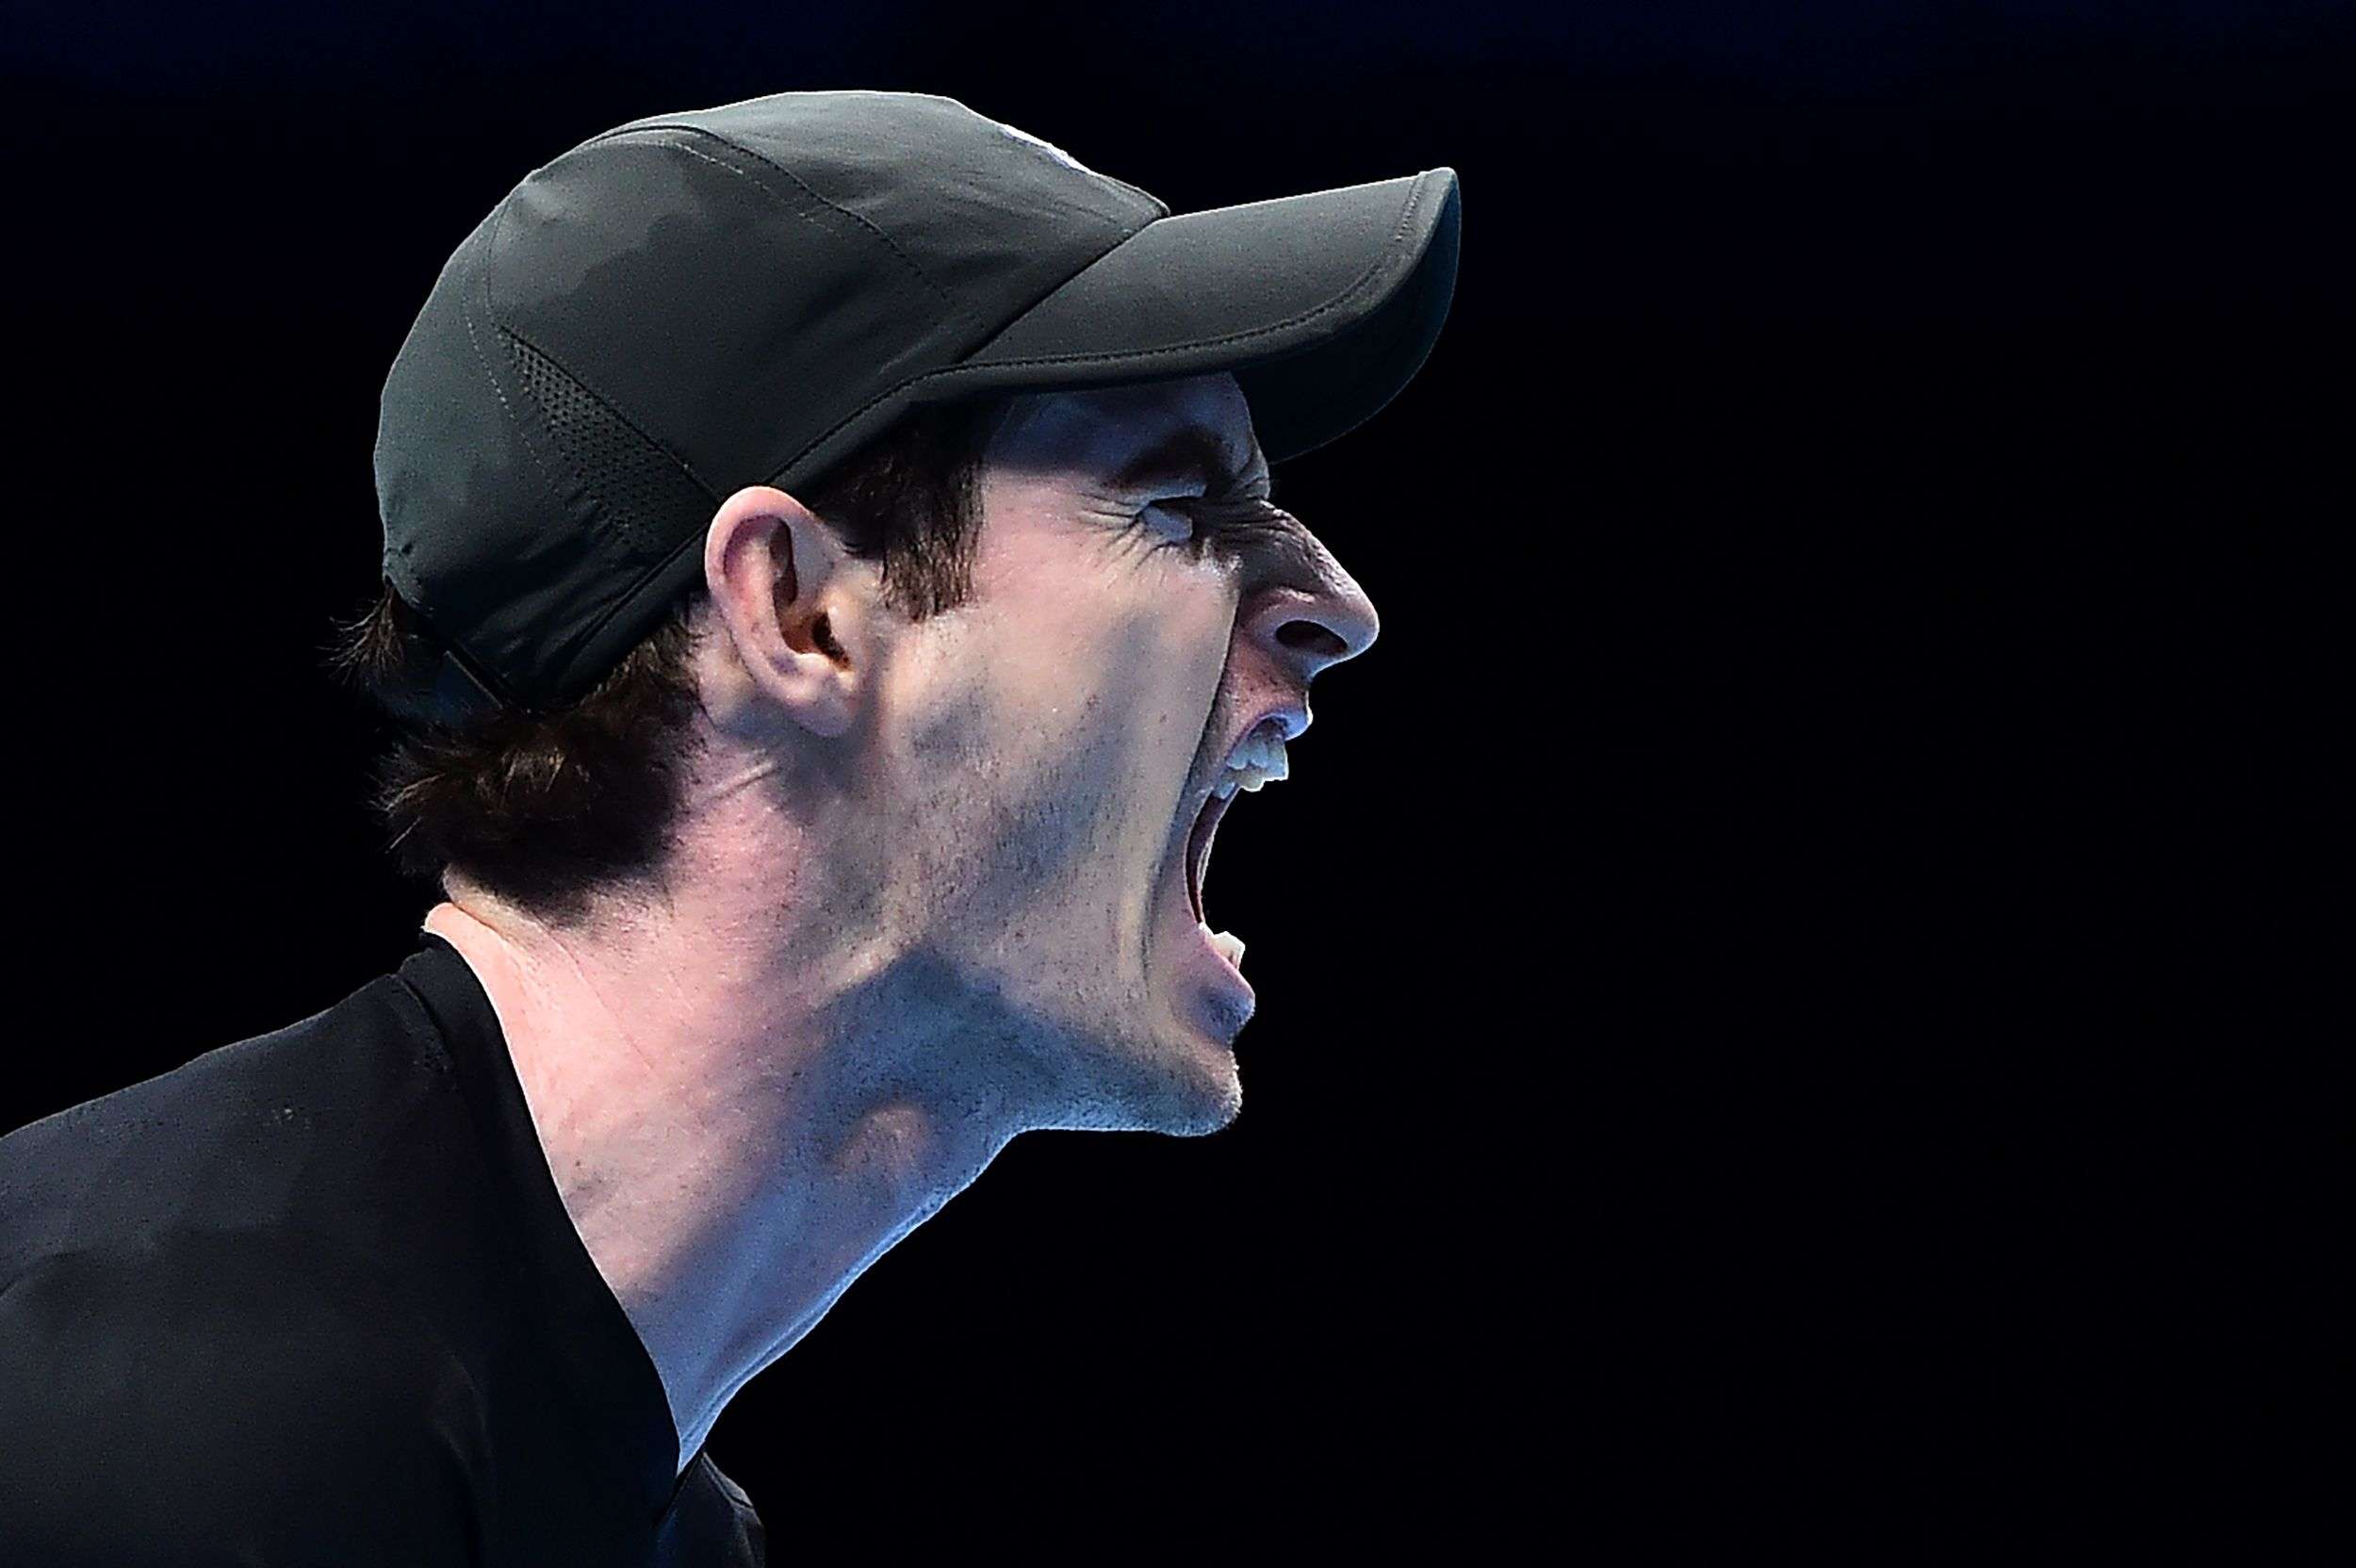 T Britain's Andy Murray reacts after losing the first set against Japan's Kei Nishikori during their round robin stage men's singles match on day four of the ATP World Tour Finals tennis tournament in London on November 16, 2016. / AFP PHOTO / Glyn KIRK